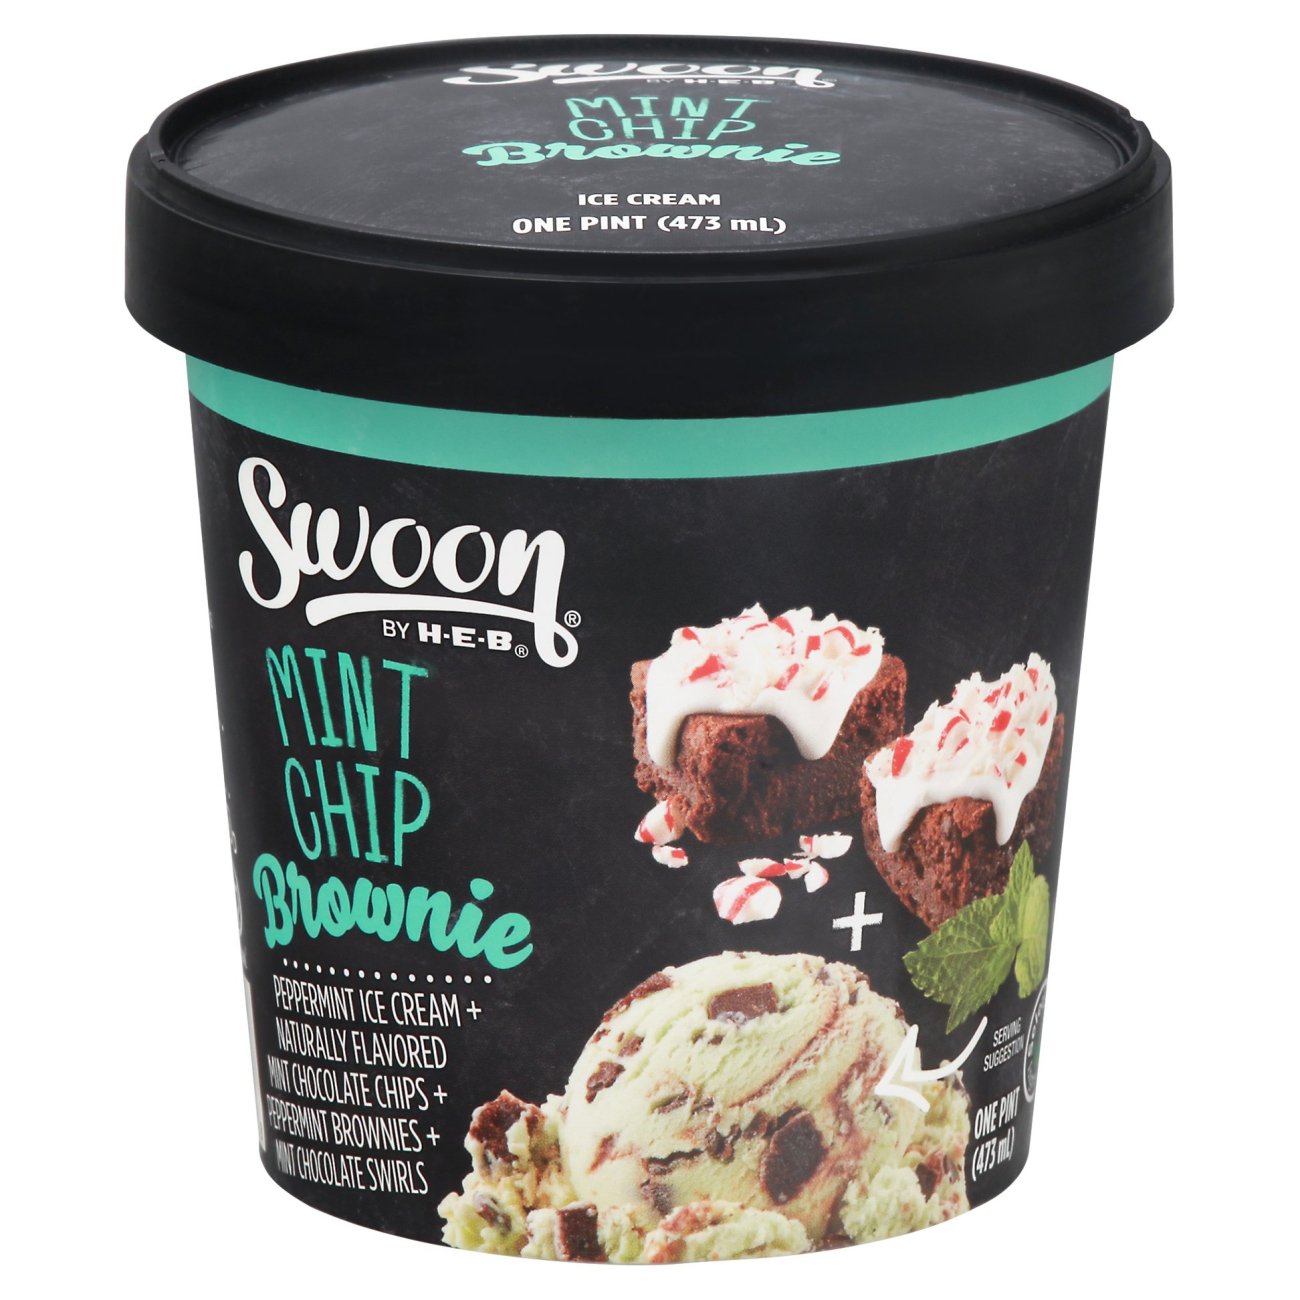 Swoon by H-E-B Mint Chip Brownie Ice Cream - Shop Ice Cream at H-E-B